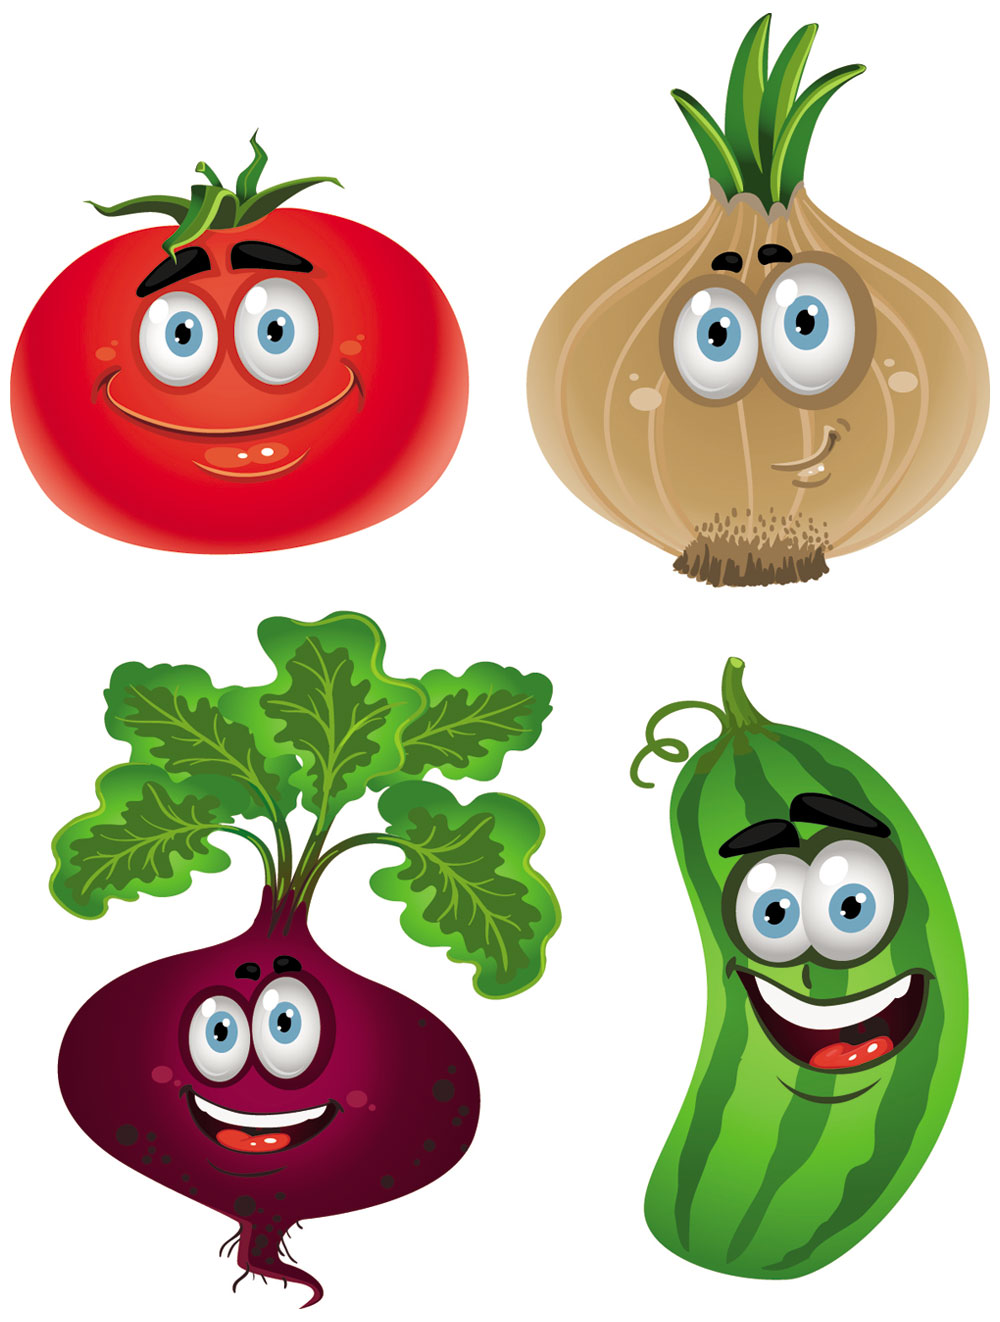 Animated fruits and vegetables clipart